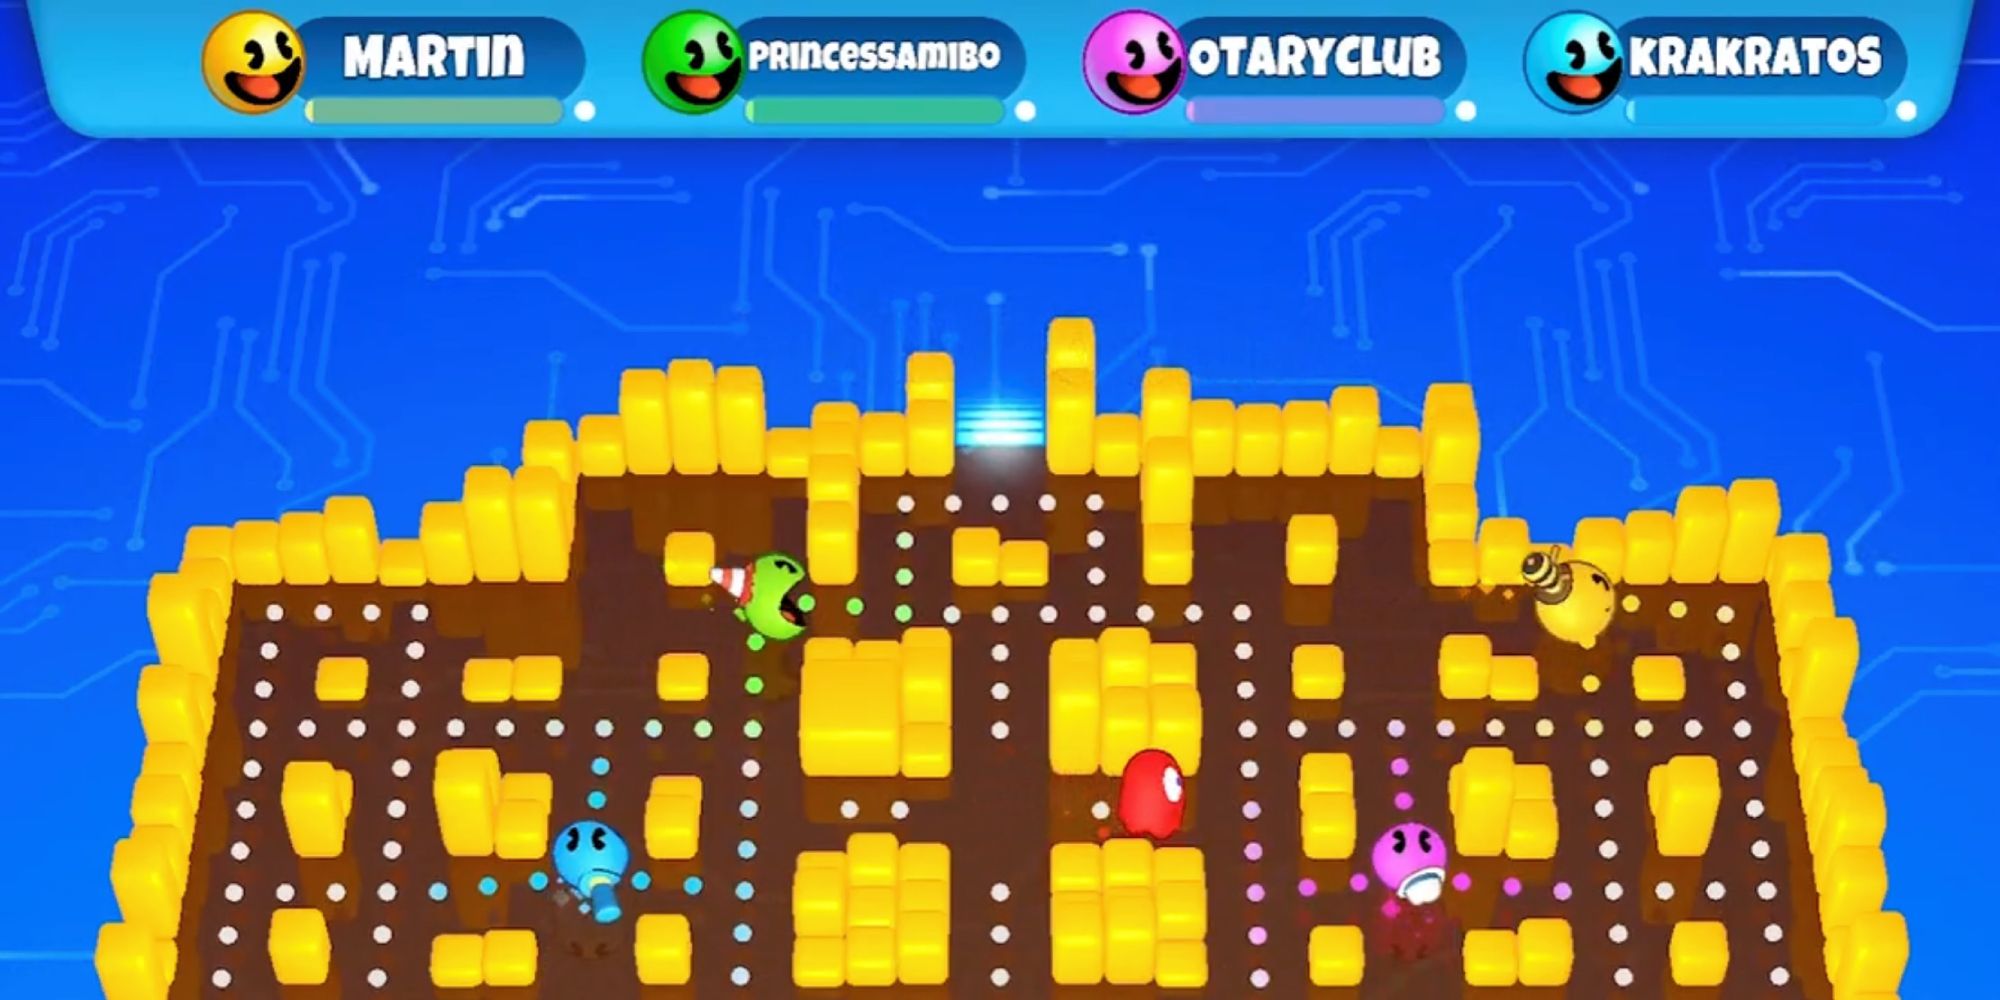 Multiplayer gameplay in PAC-MAN Party Royale